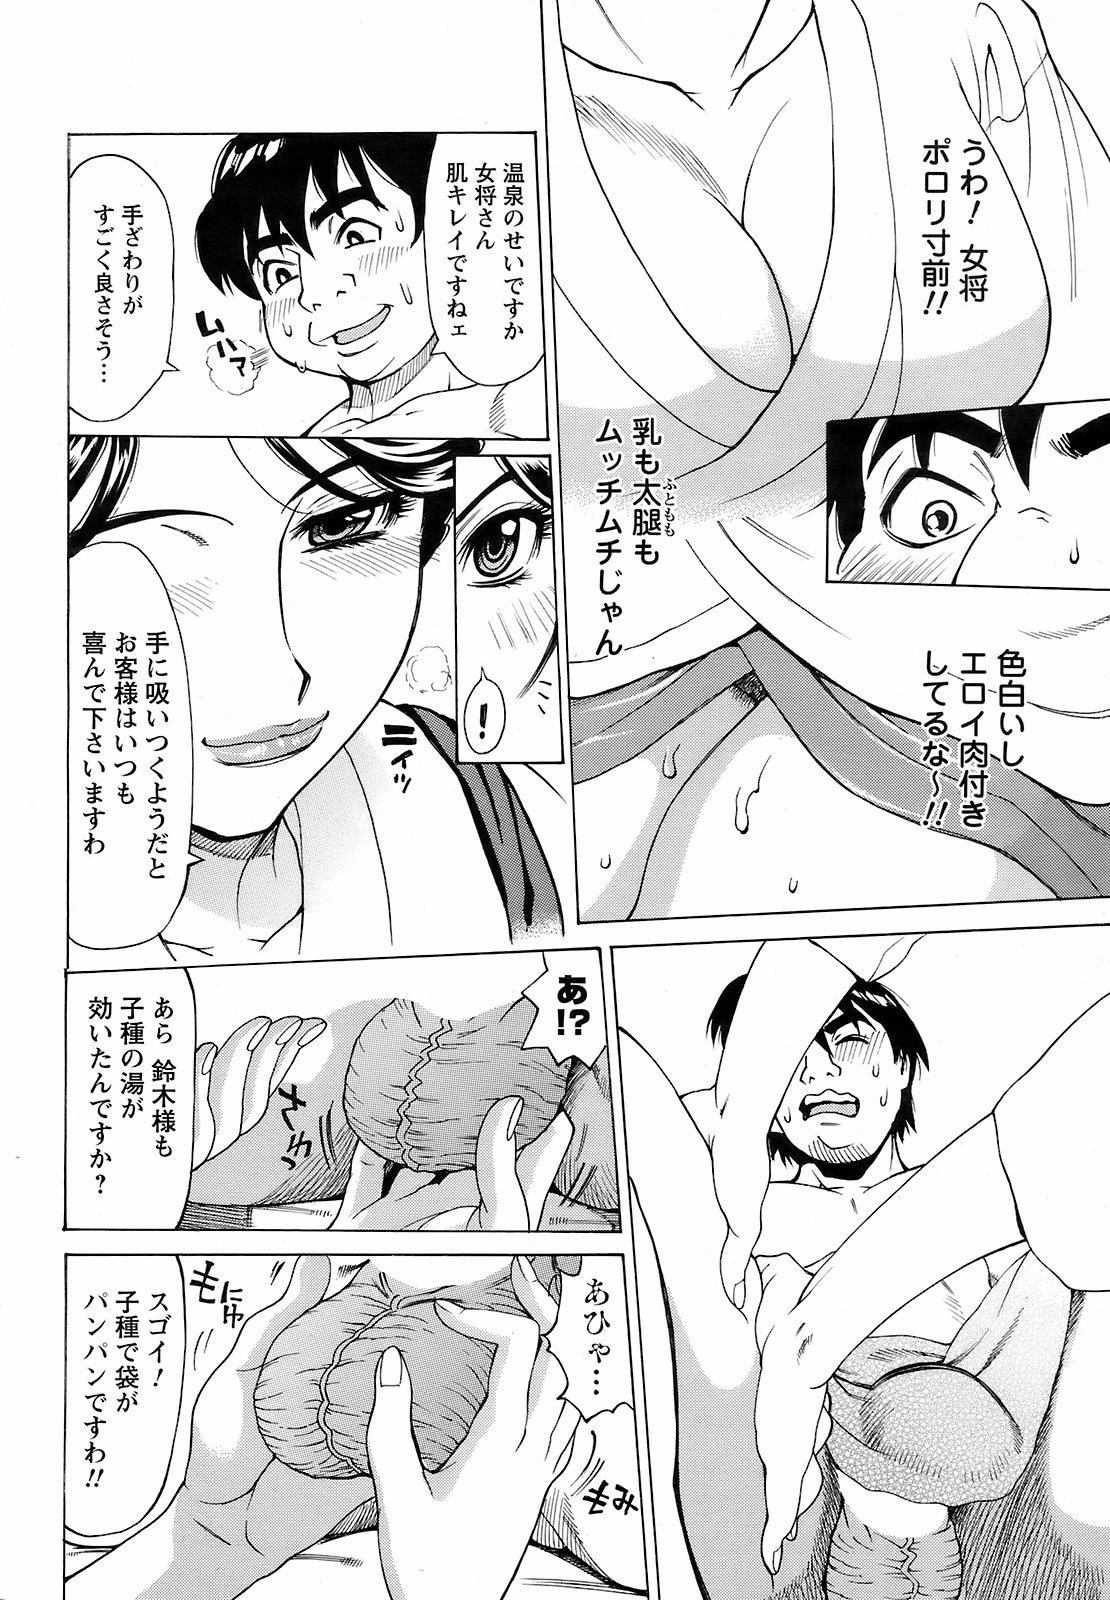 Men's Young Special IKAZUCHI 2009-03 Vol. 09 198